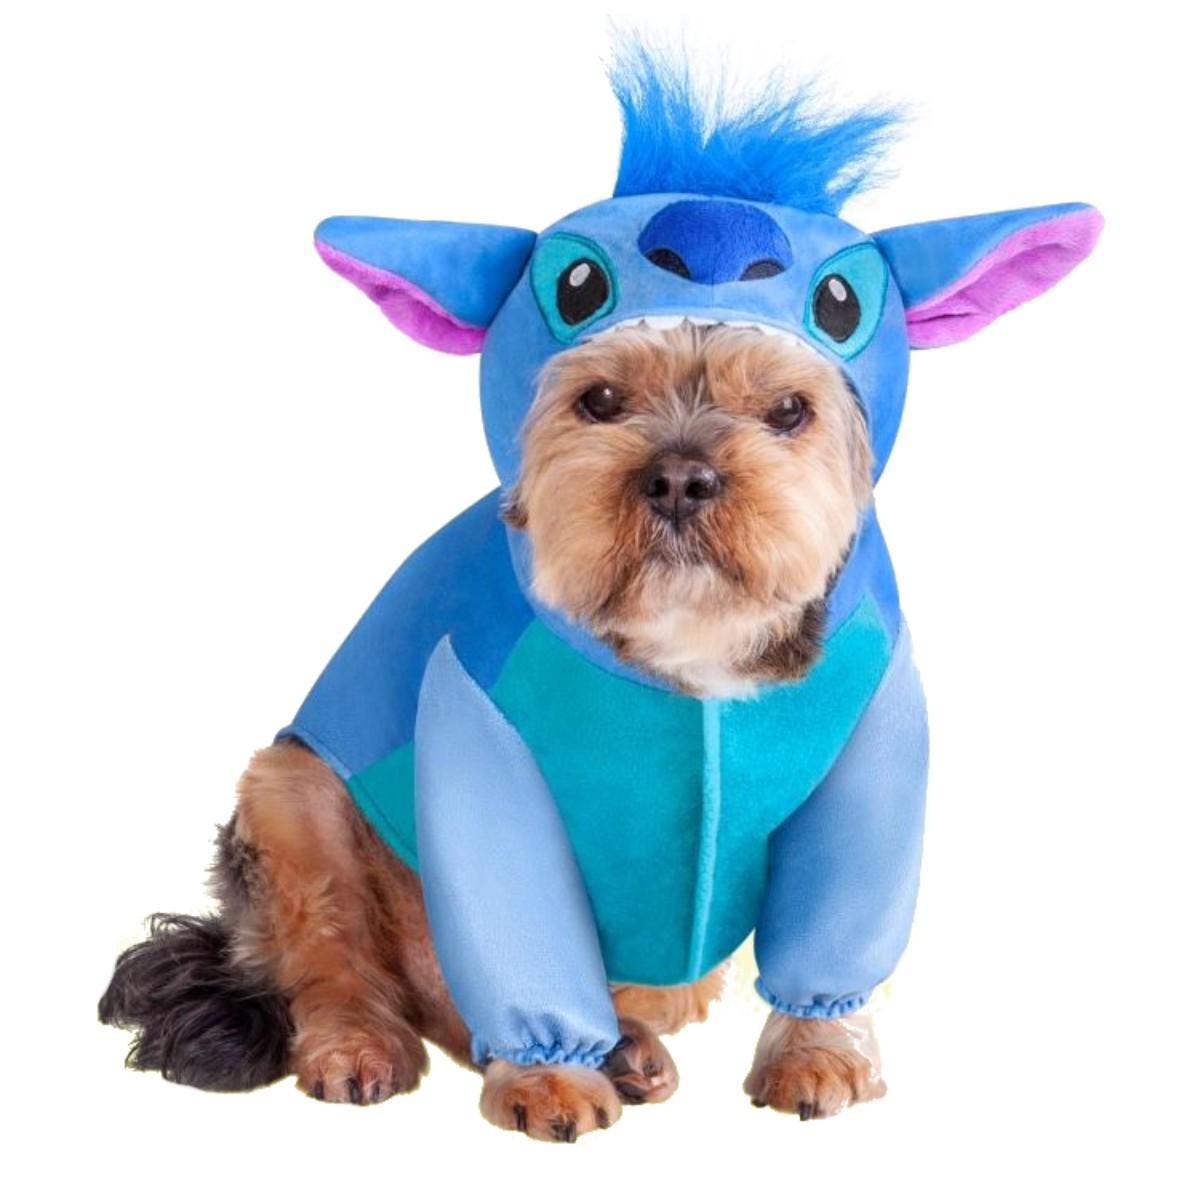 Primark Is Selling An Adorable Stitch Pets Collection - And We're